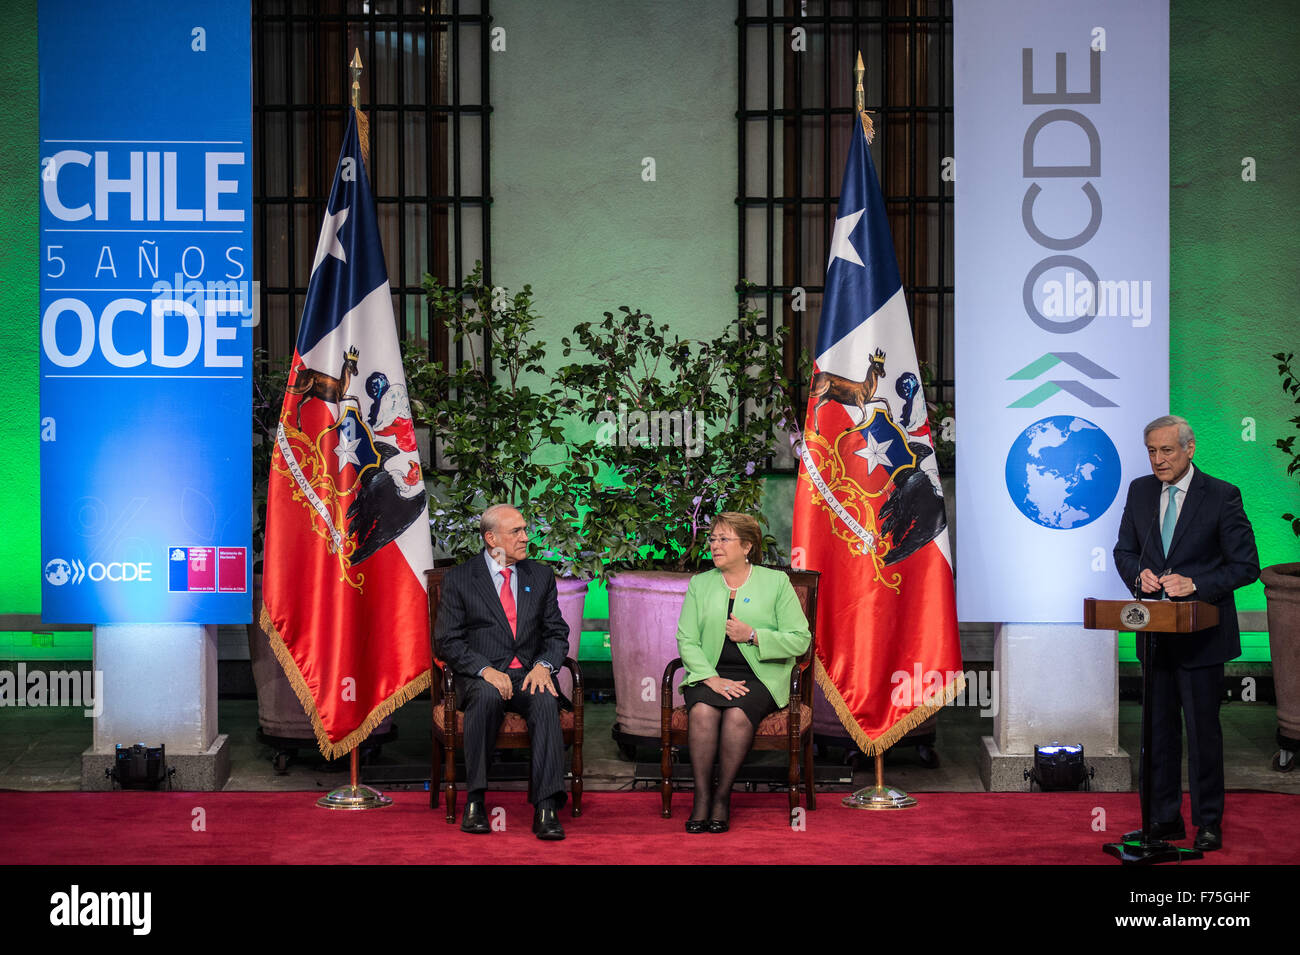 Santiago, Chile. 25th Nov, 2015. Chile's Foreign Minister Heraldo Munoz(R) delivers a speech in presence of Chilean President Michelle Bachelet (C) and the Secretary General of the Organzation for Economic Cooperation and Development (OECD) Jose Angel Gurria during a ceremony at La Moneda Palace in Santiago, capital of Chile, on Nov. 25, 2015. © Jorge Villegas/Xinhua/Alamy Live News Stock Photo